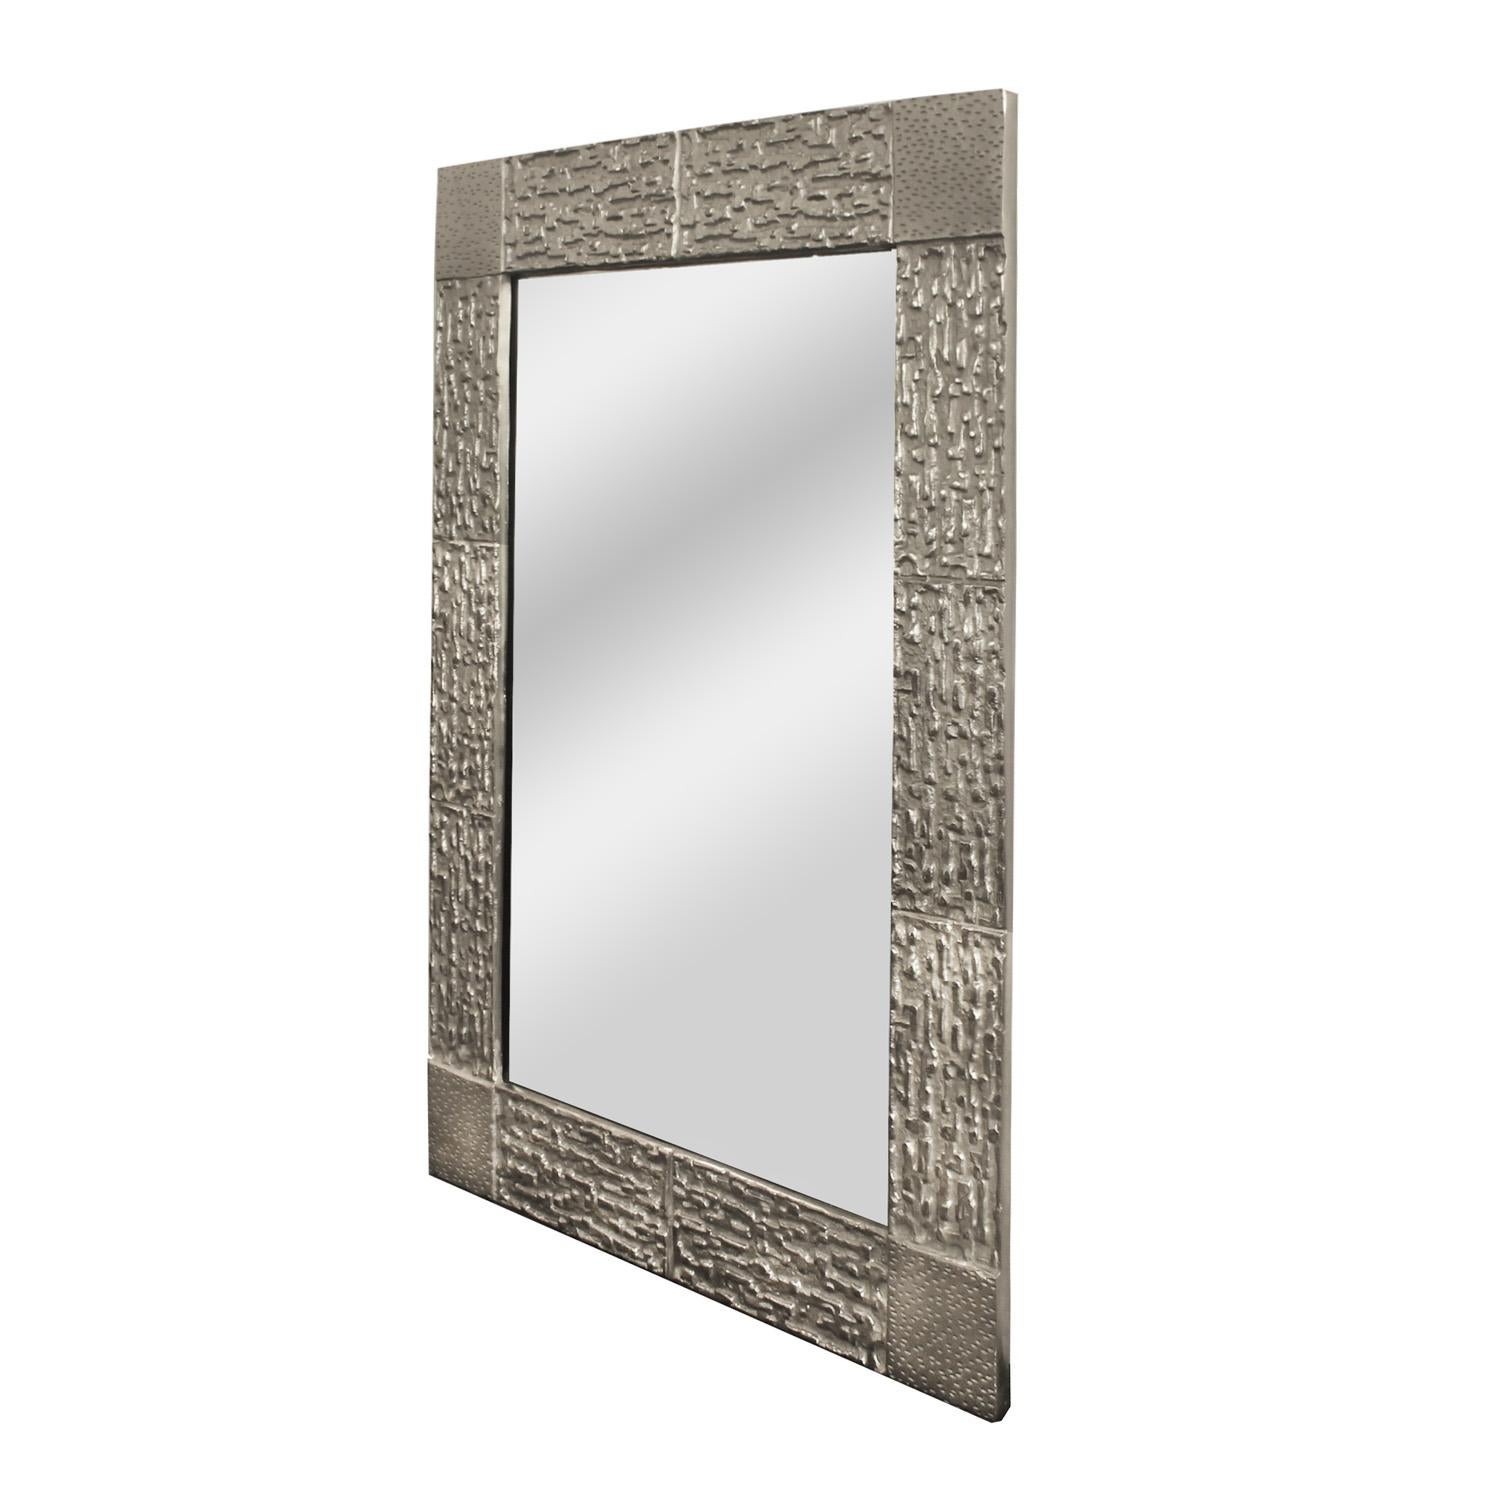 Striking Brutalist wall mirror in the style of Luciano Frigerio in brushed nickel with clear glass. American, 2022

 Customization of size, finish and mirror are available. 8-10 week lead time.